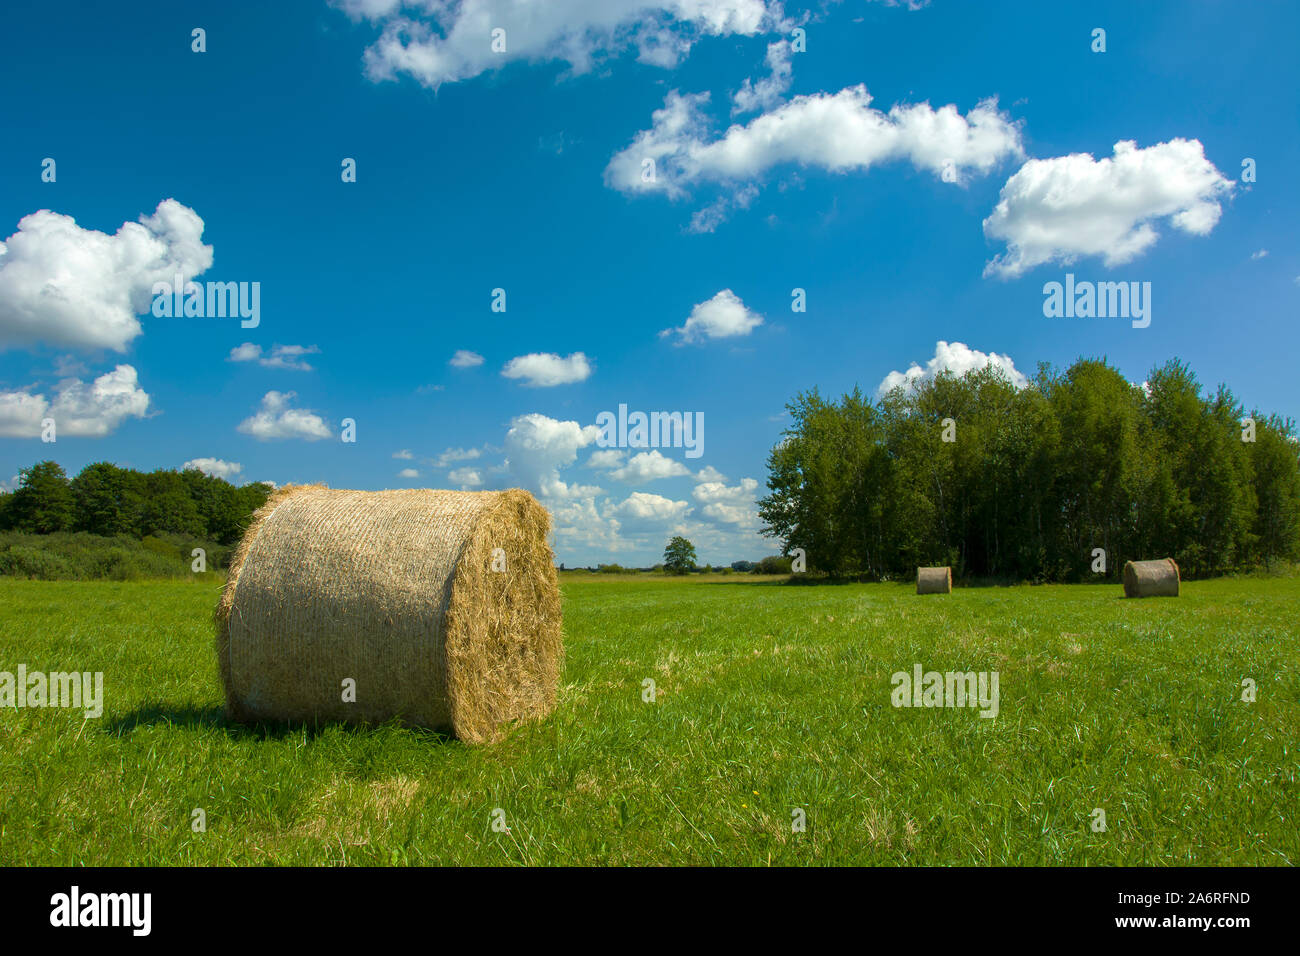 Round hay bale on a green meadow, trees and white clouds on a blue sky Stock Photo